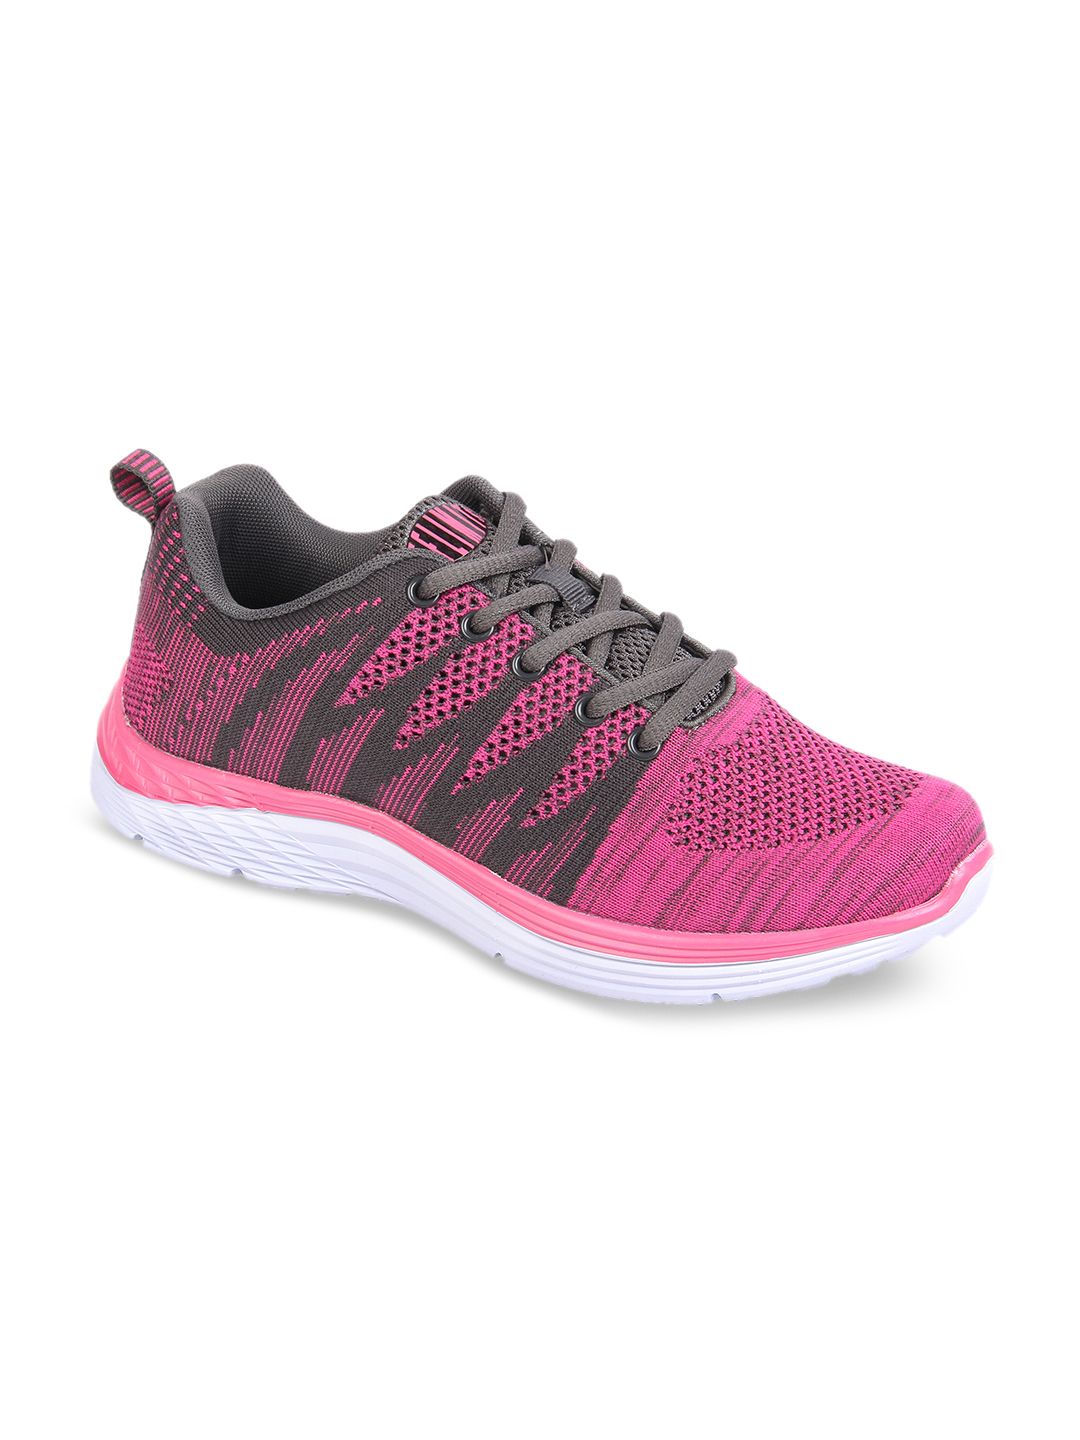 OFF LIMITS Women Pink & Grey Running Shoes Price in India